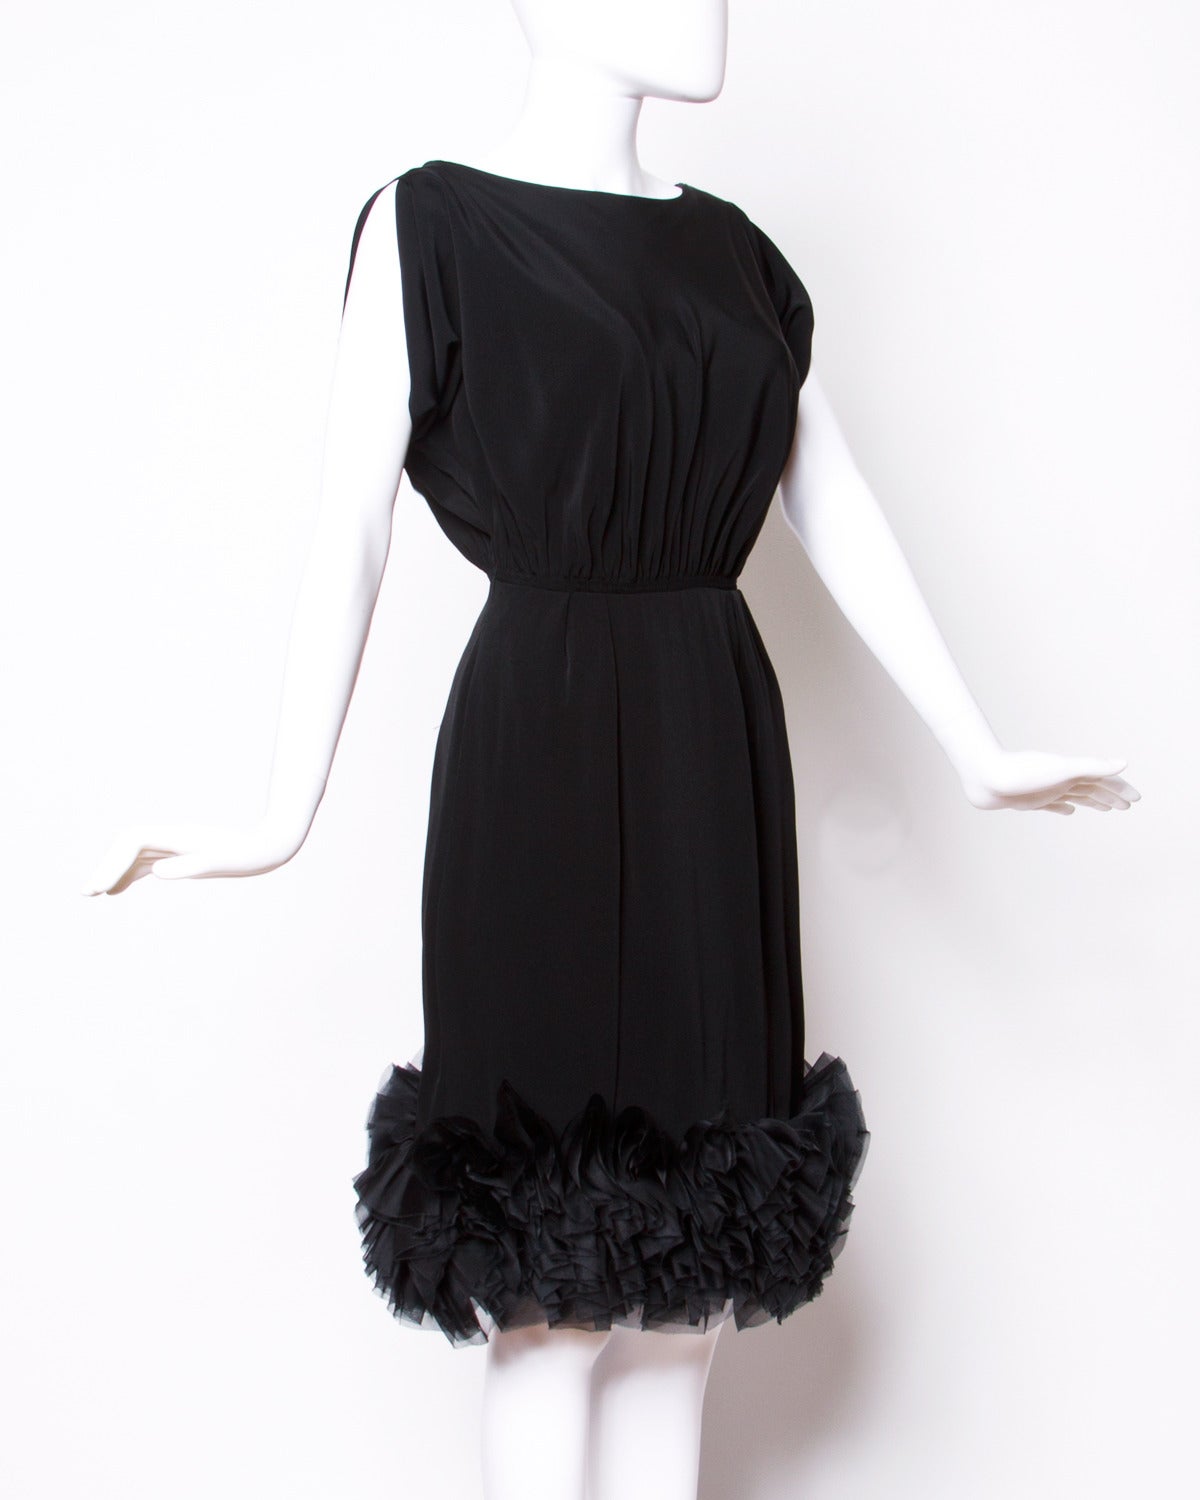 Chic black silk cocktail dress with a ruffled hem and dolman sleeves.

Details:

Fully Lined
Back Metal Zip and Hook Closure
Estimated Size: Medium
Color: Black
Fabric: Feels like Silk Crepe

Measurements:

Bust: Free
Waist: 28